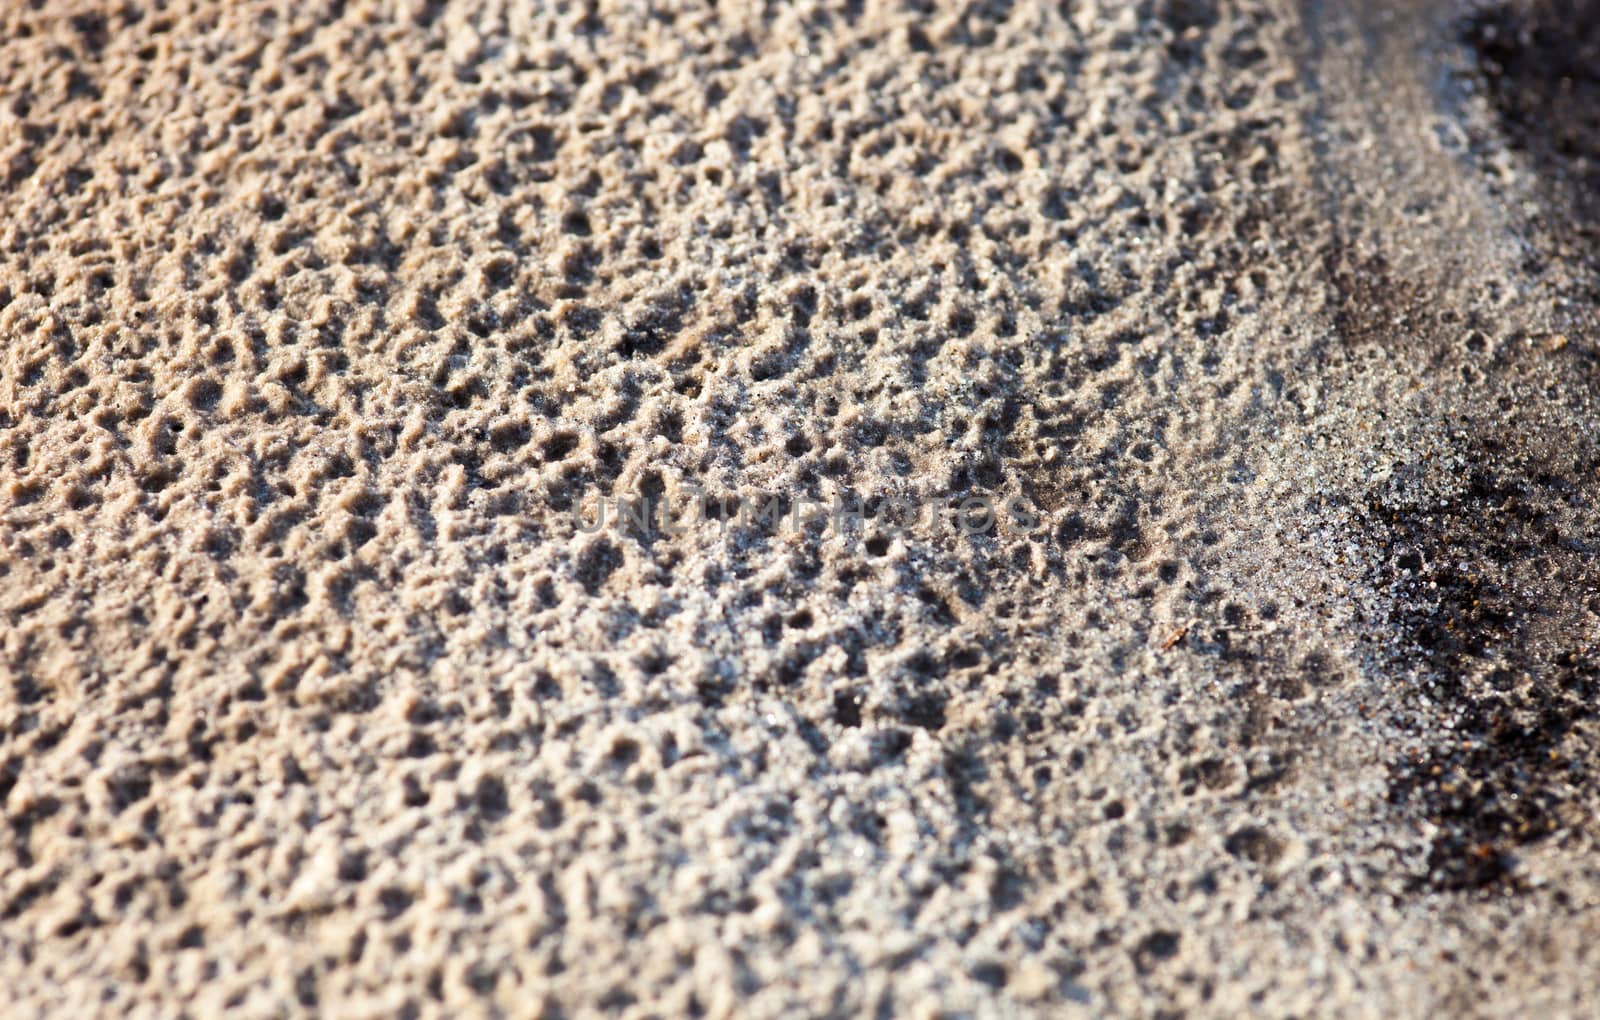 Sand surface after the rain with the visible traces of the raindrops